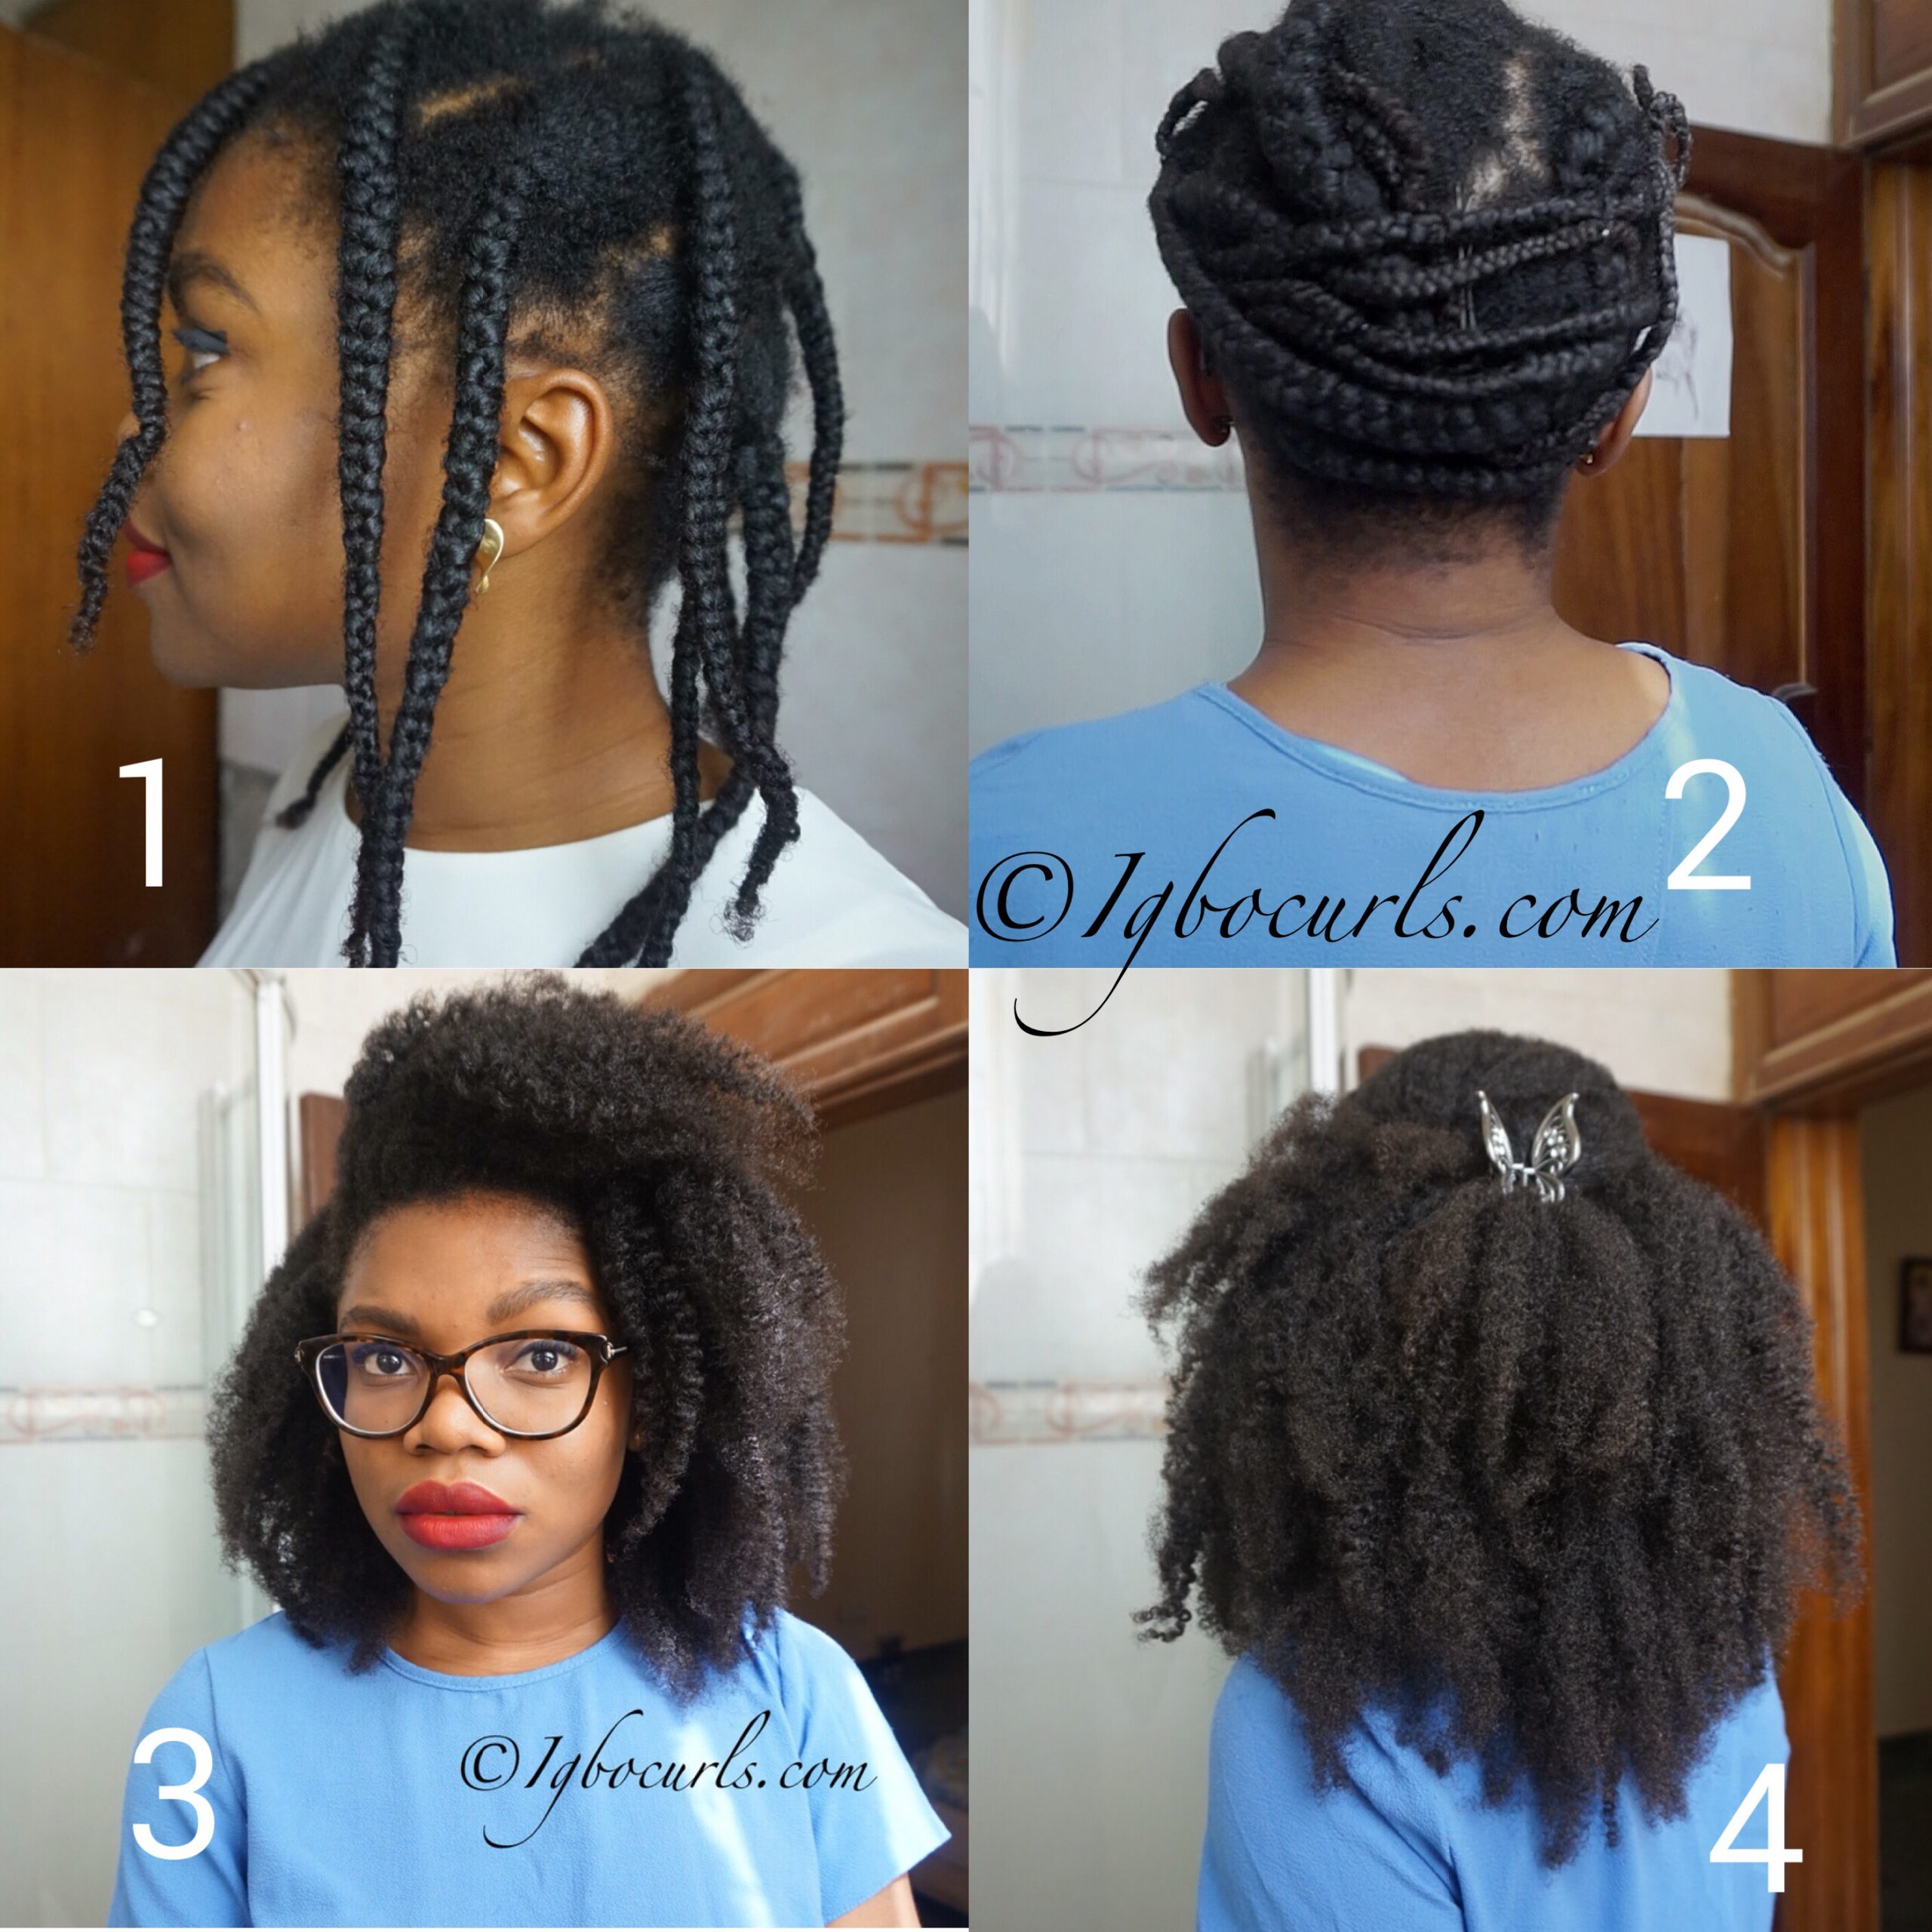 How To Stretch Natural Hair Without Heat Damage